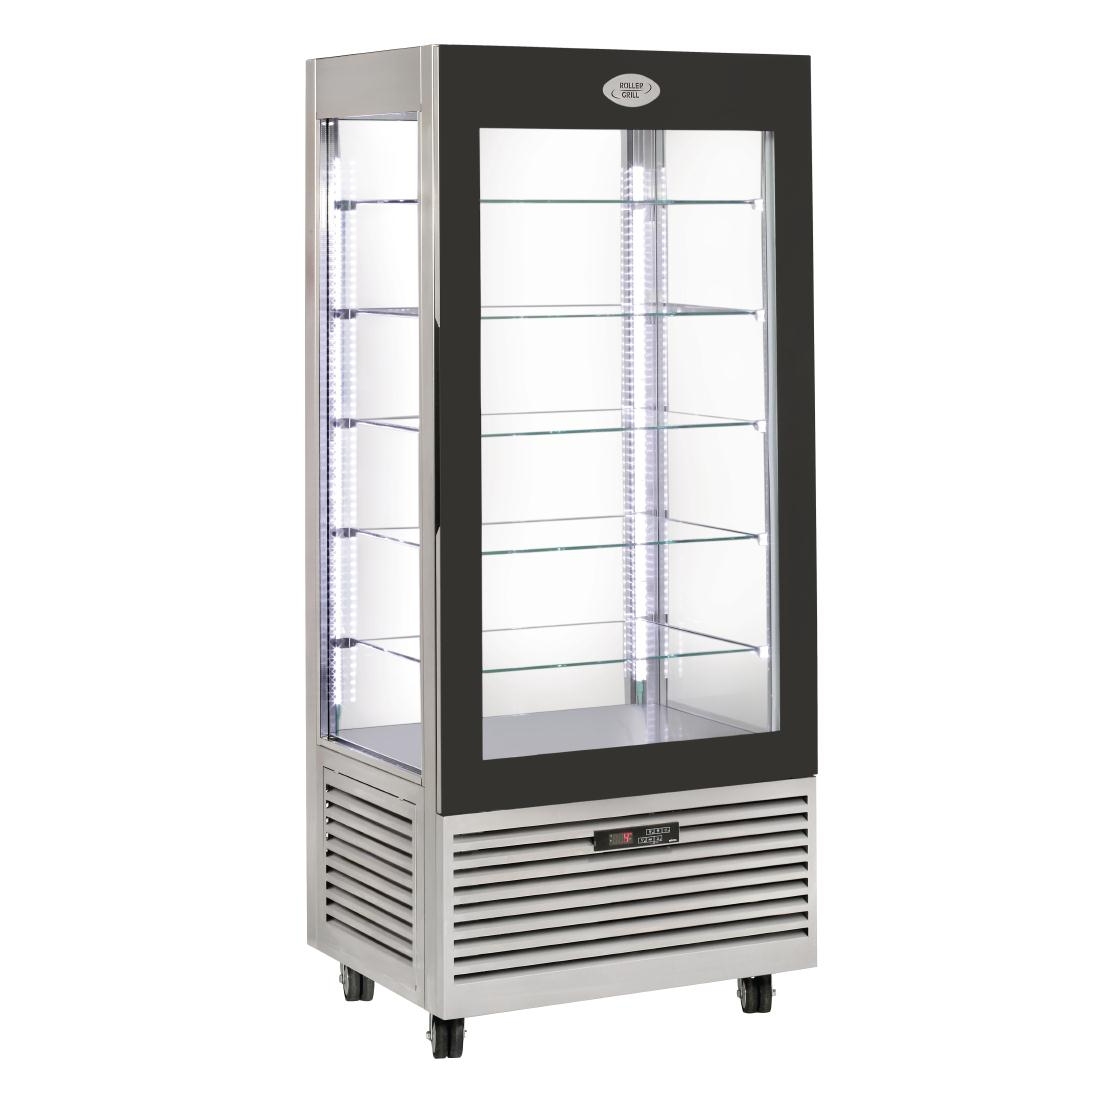 Roller Grill Refrigerated Display Cabinet RD80F